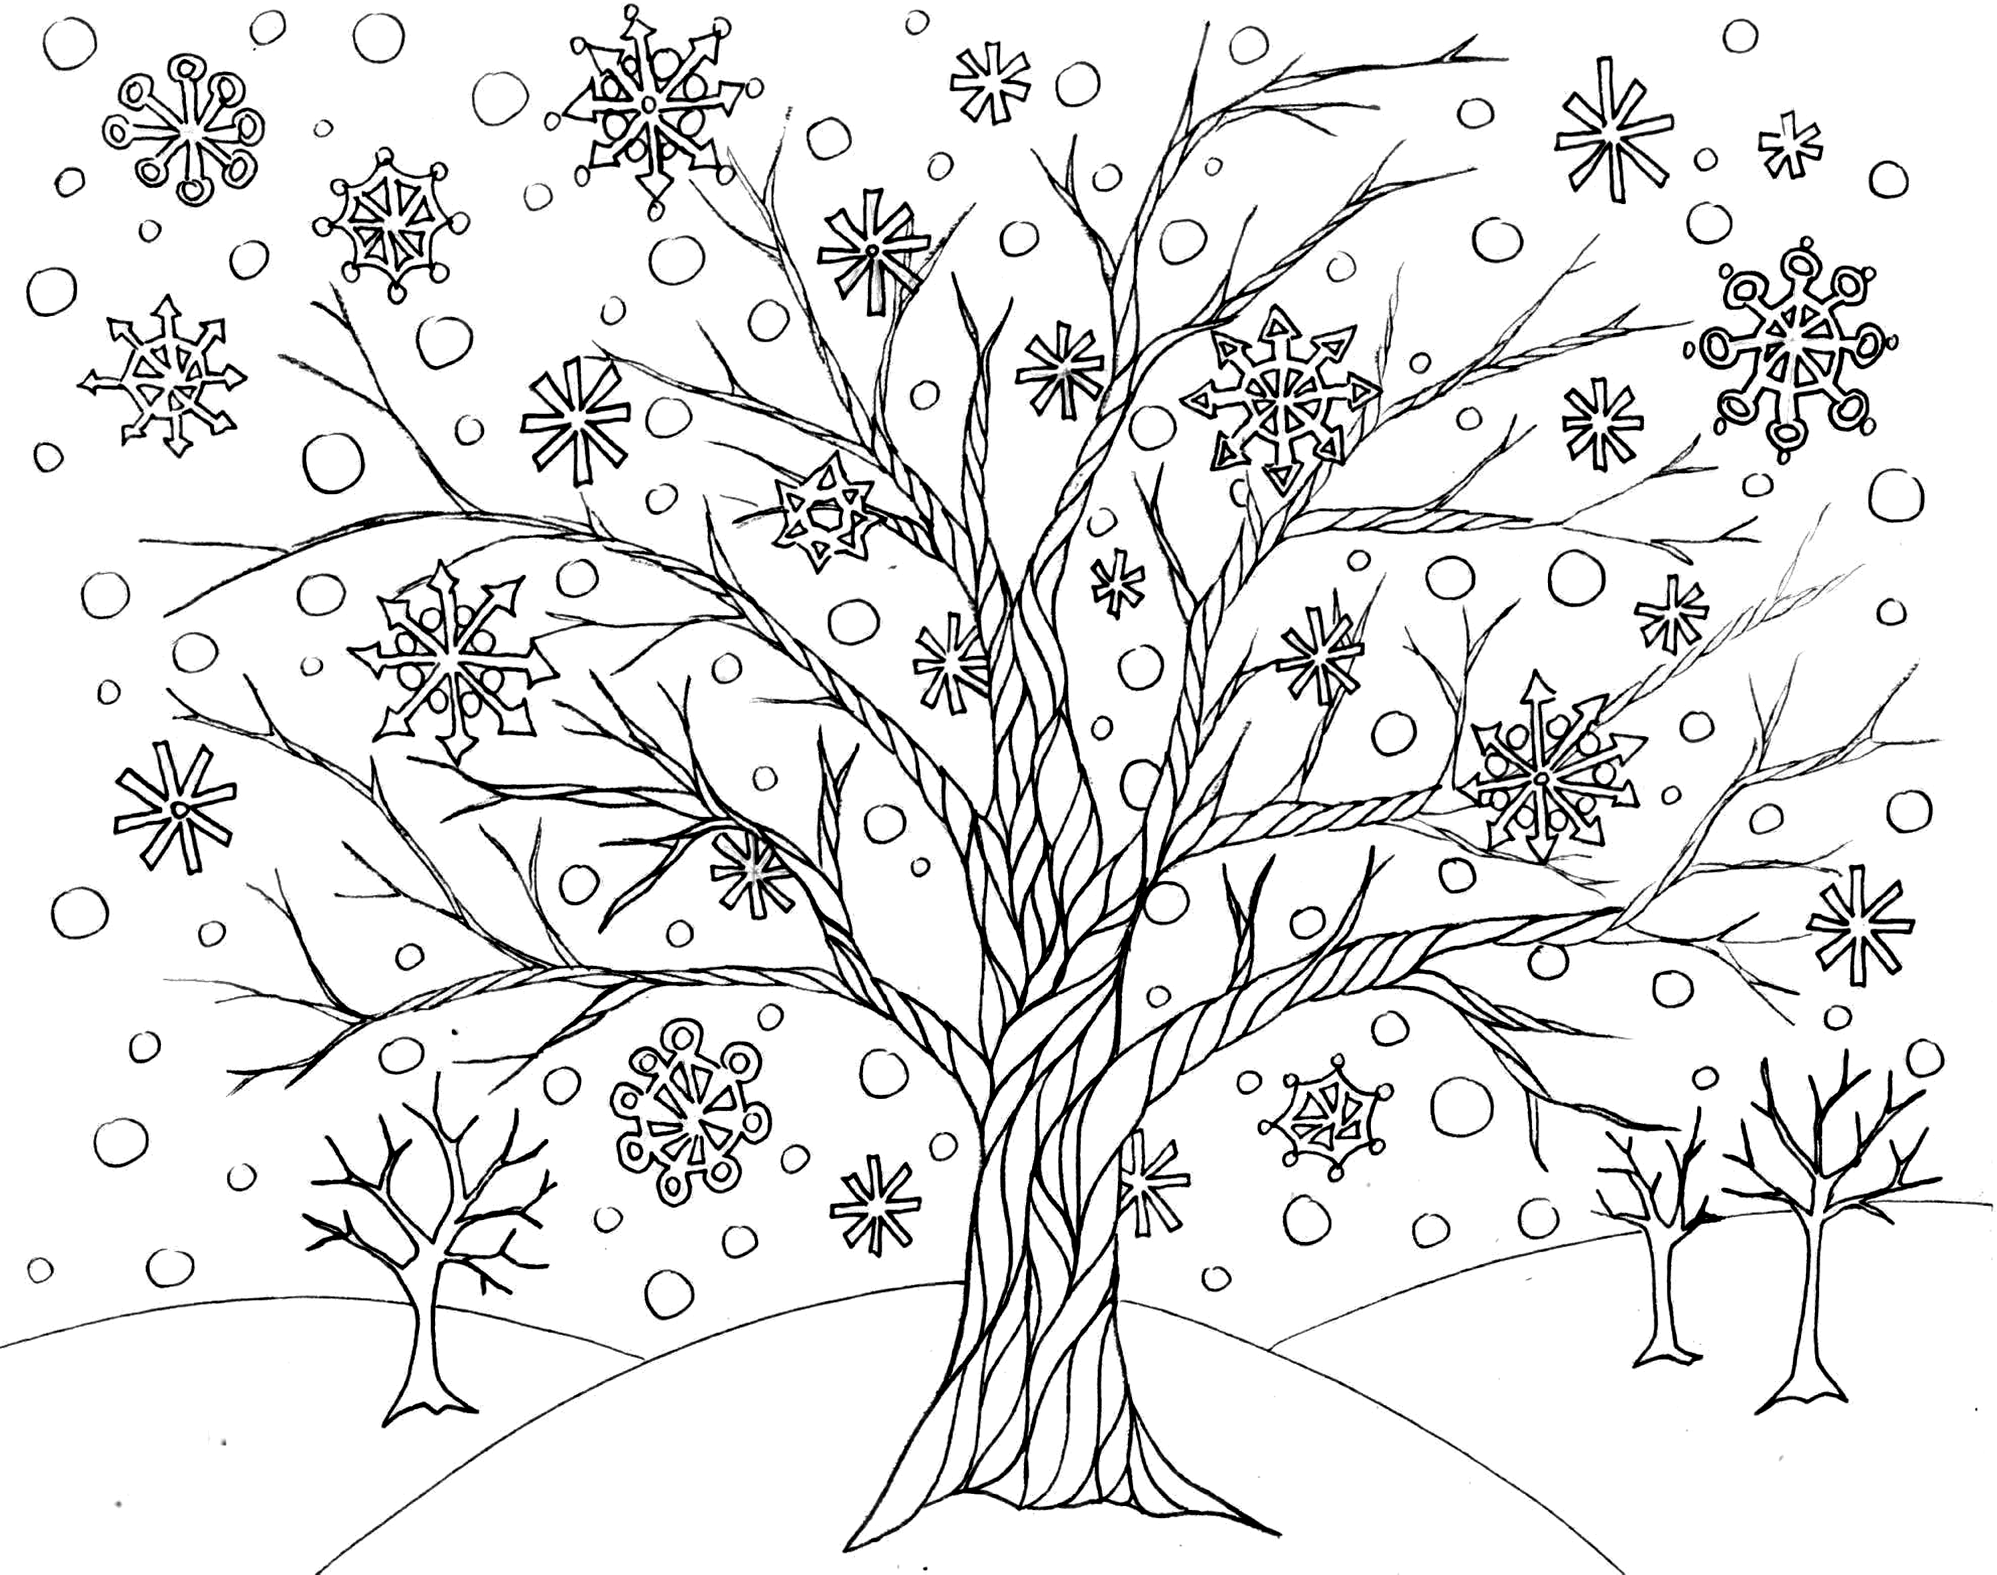 Free winter tree coloring page â from victory road